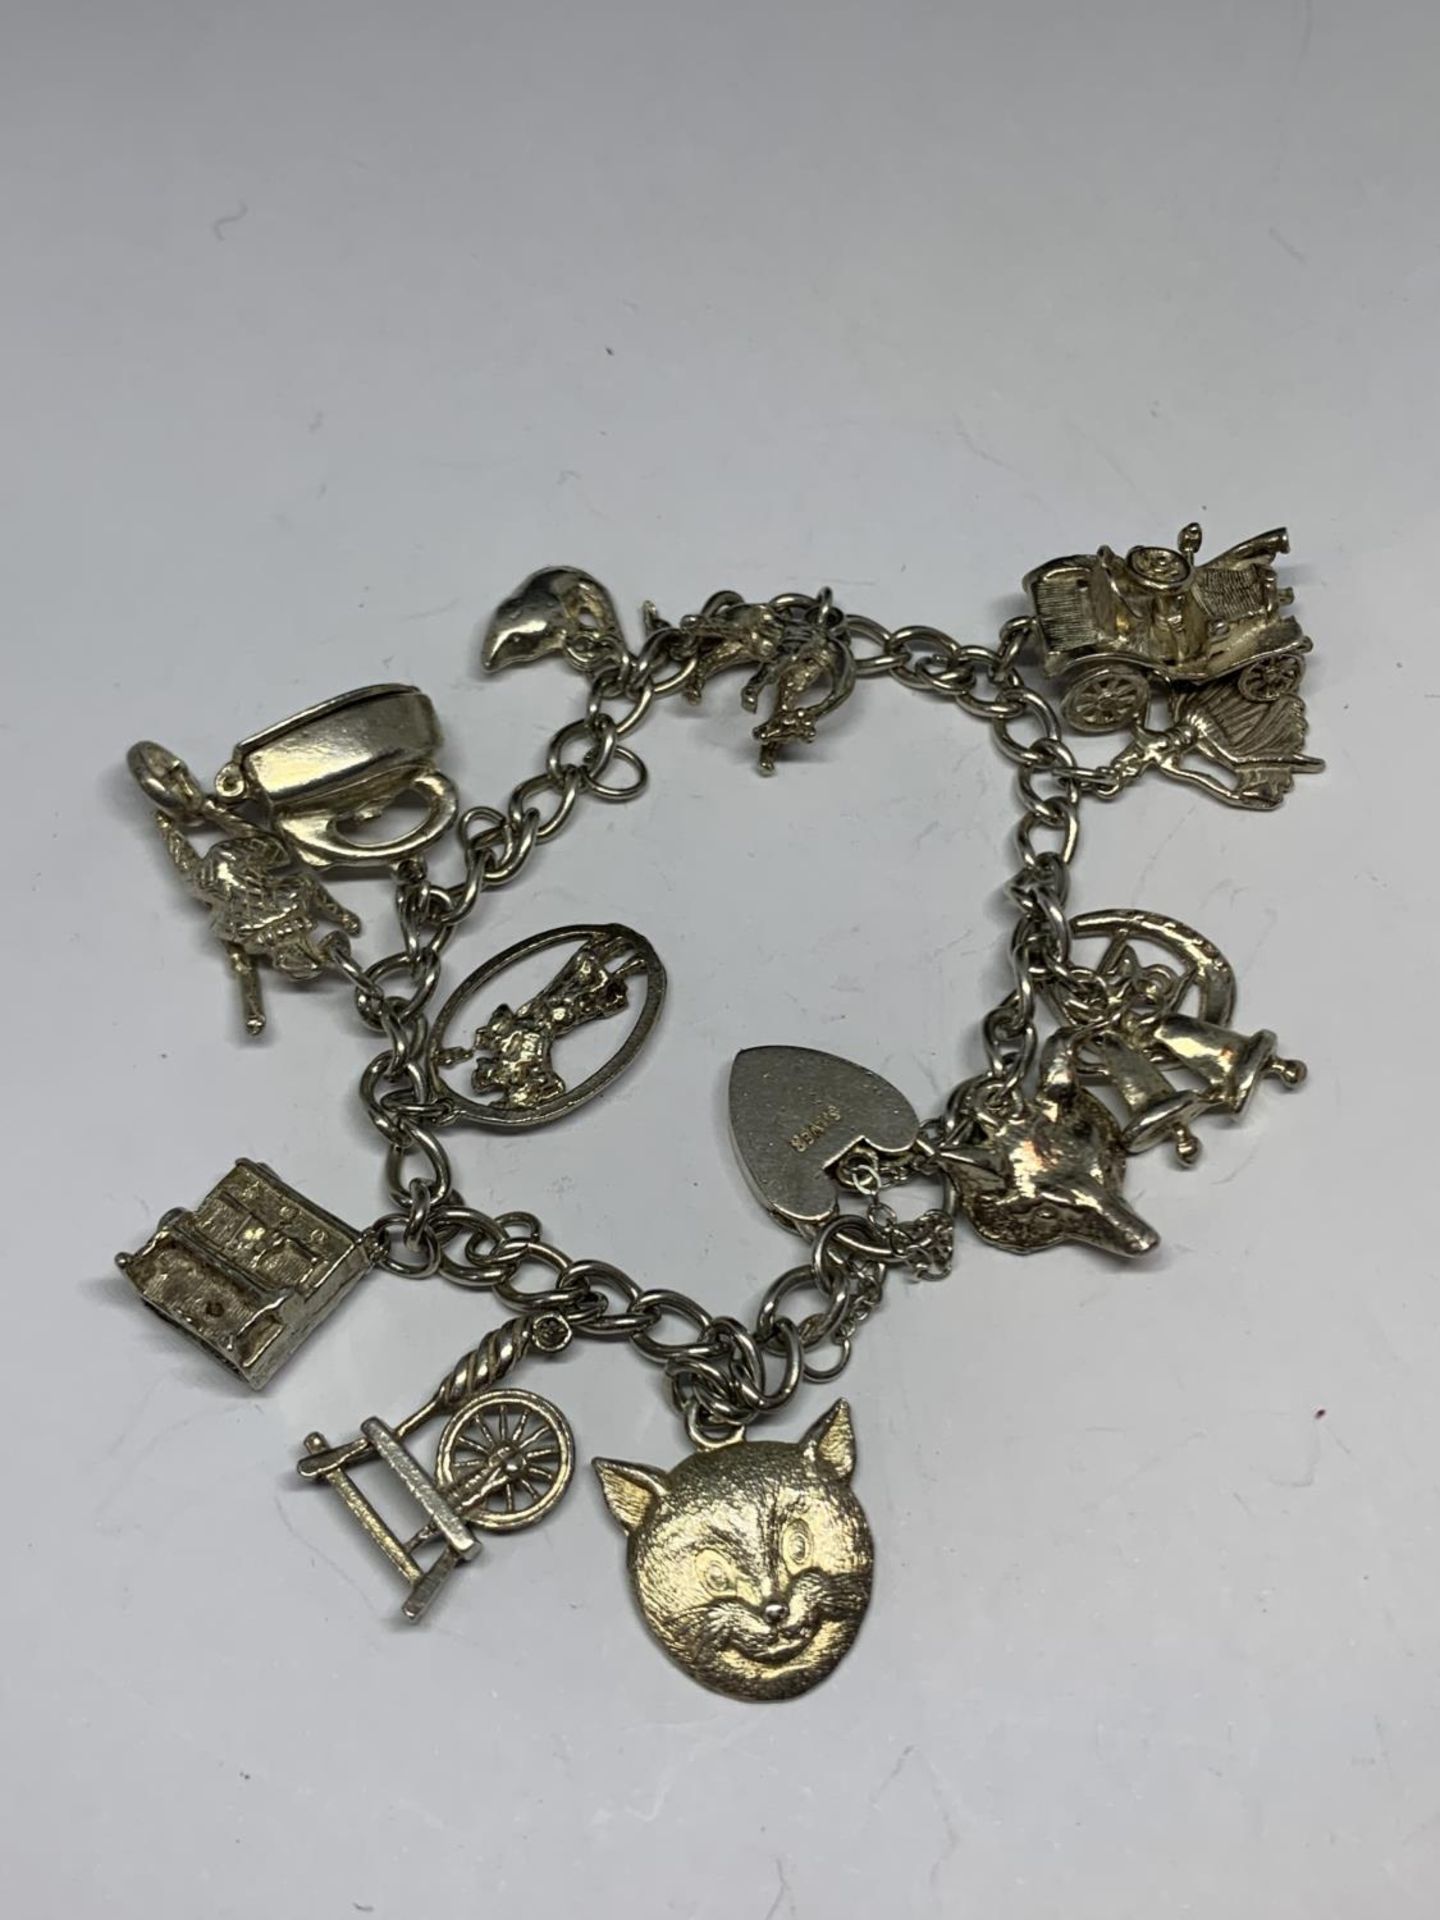 A SILVER BRACELET WITH THIRTEEN CHARMS